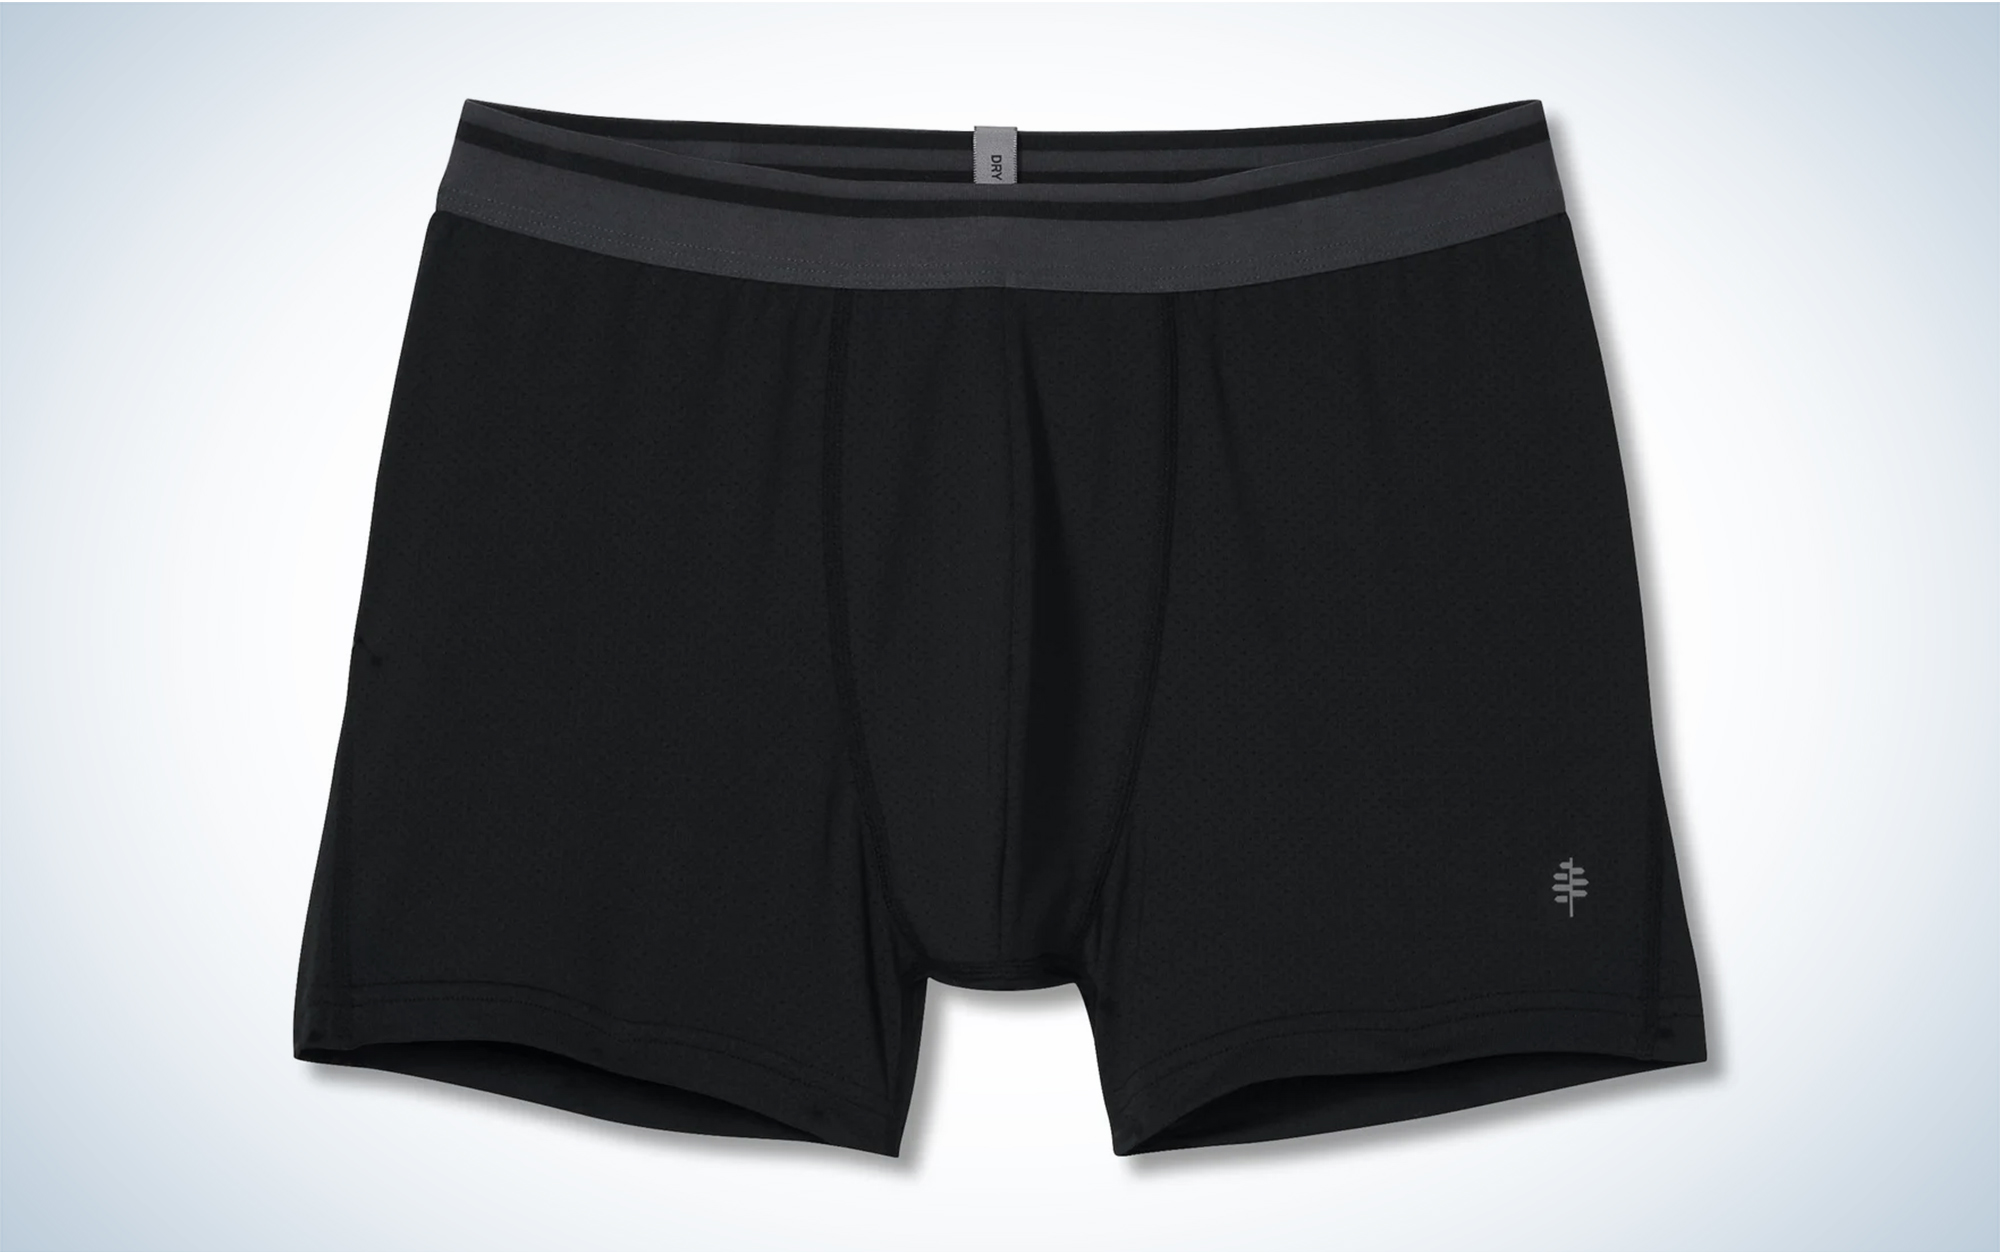 We tested the Royal Robbins Readydry Boxer Brief.